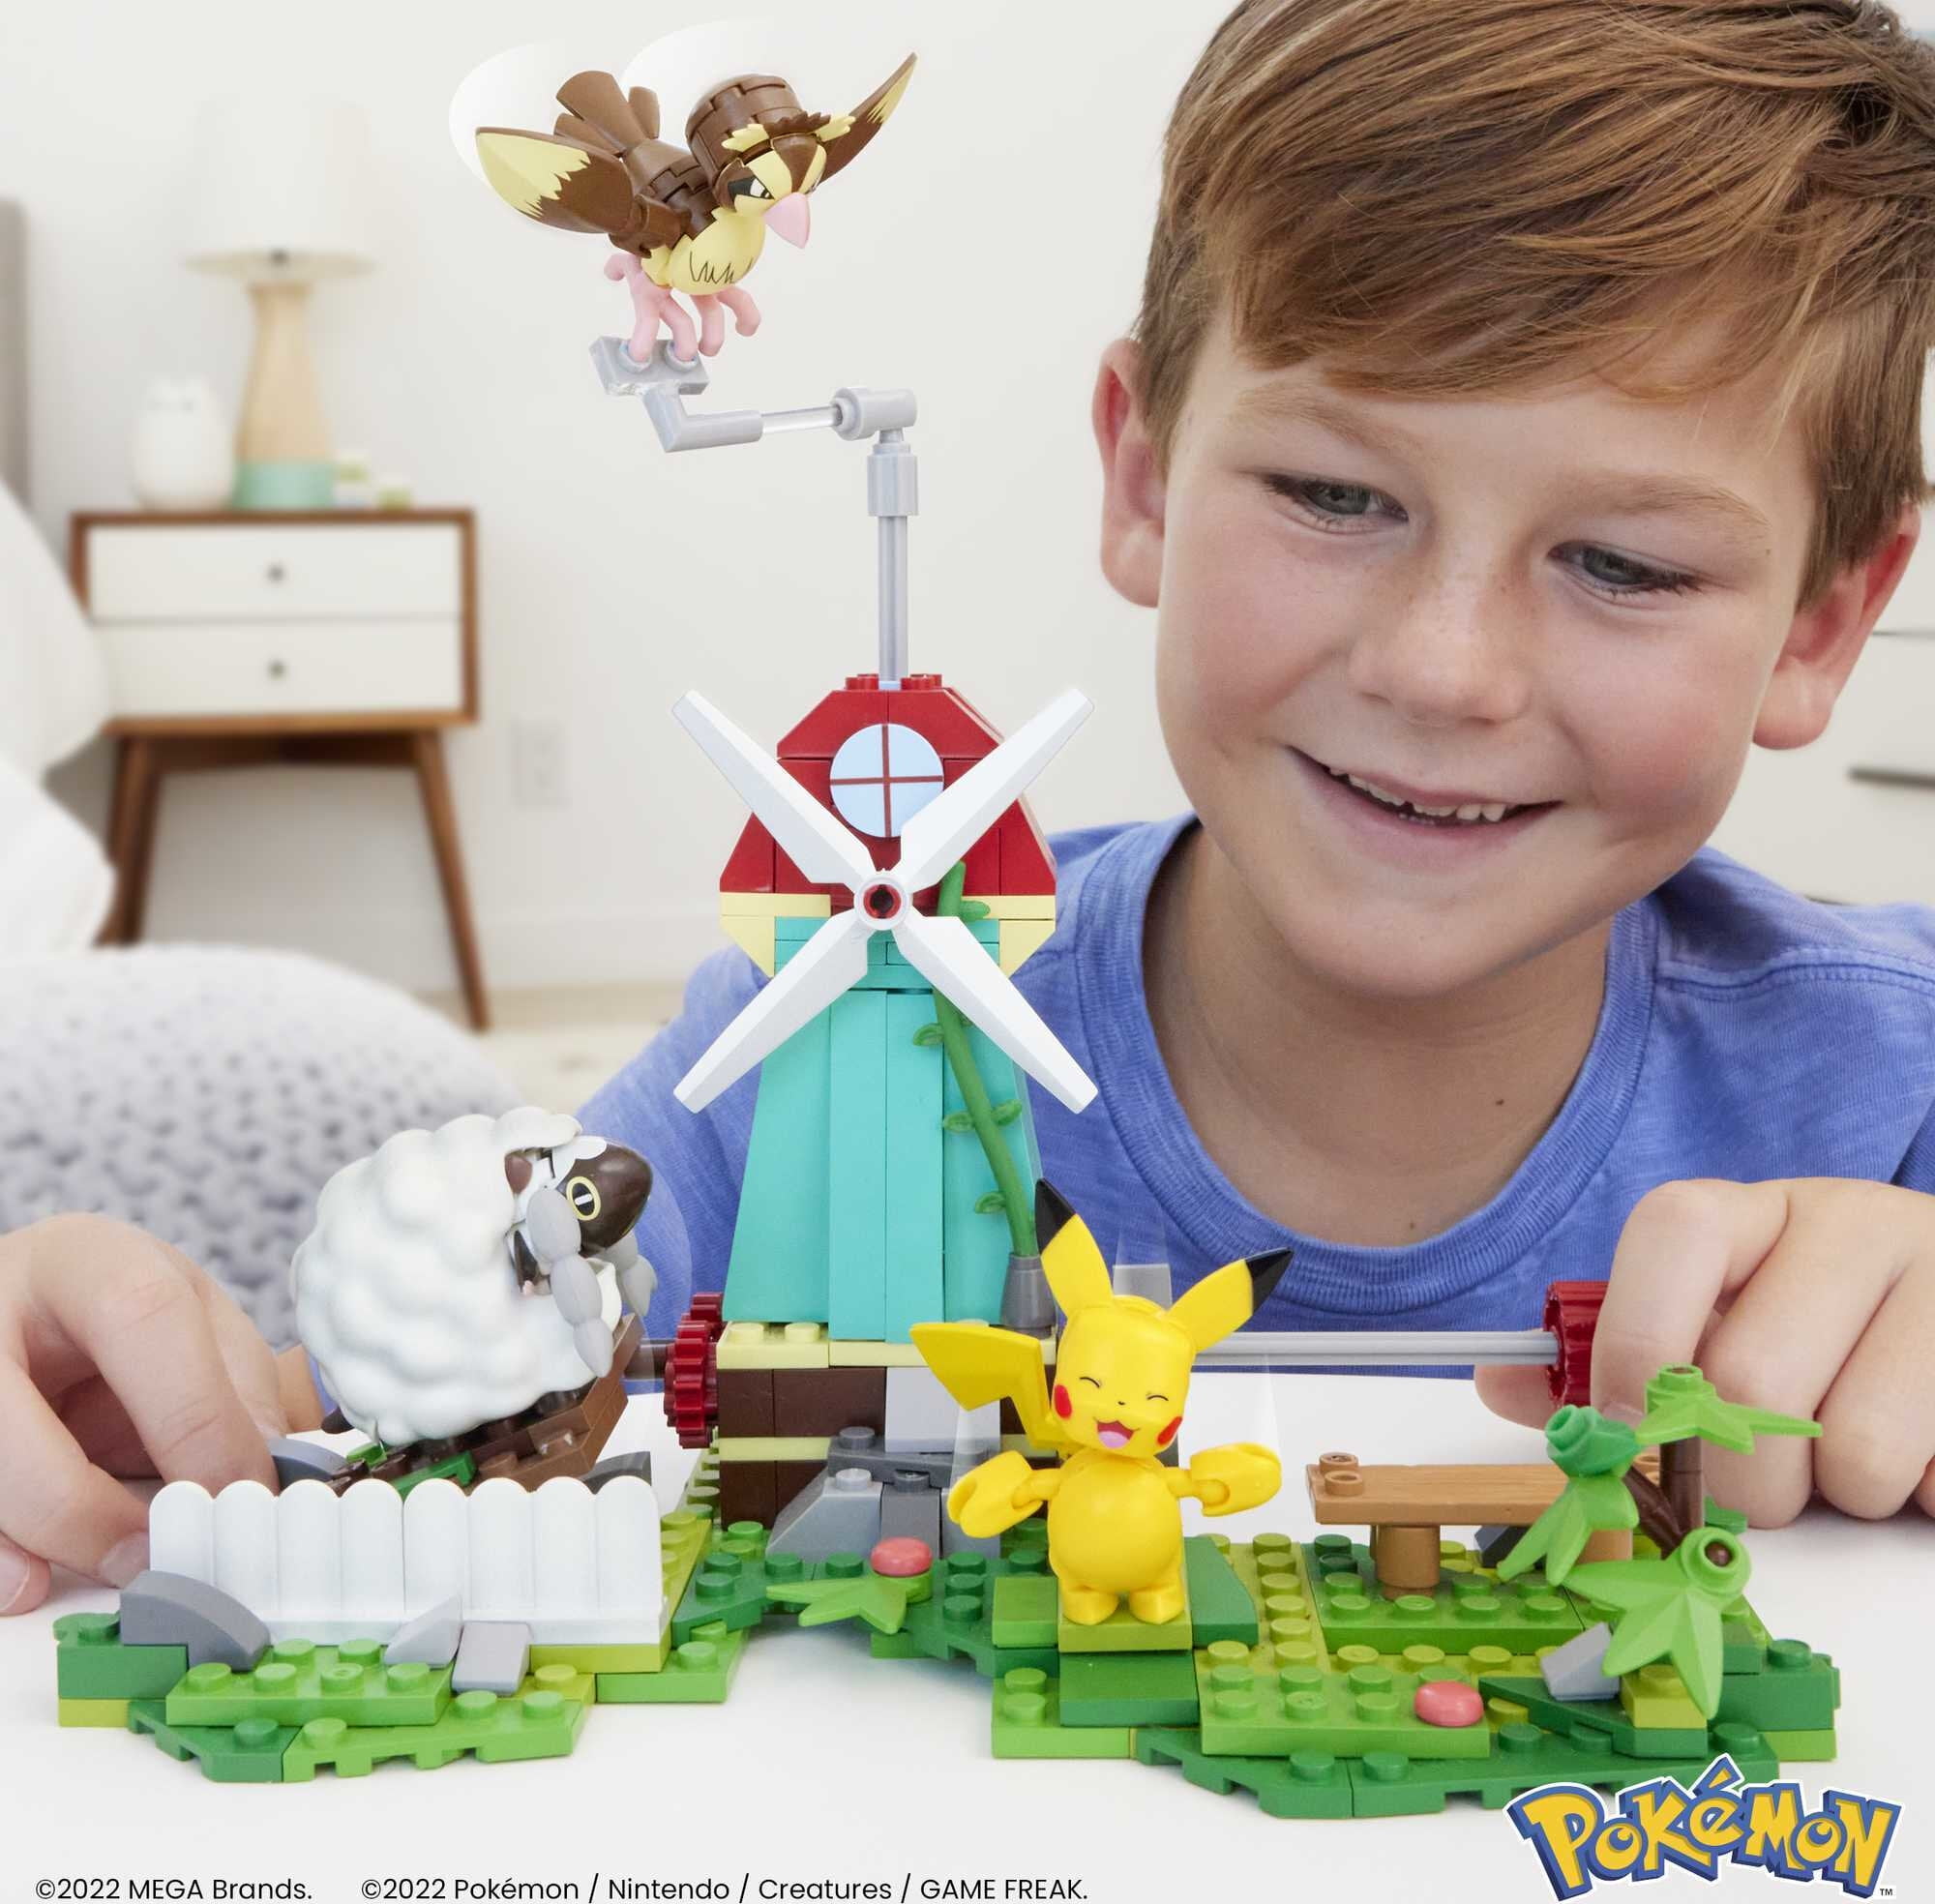 Pokemon LEGO Projects to Build - Frugal Fun For Boys and Girls